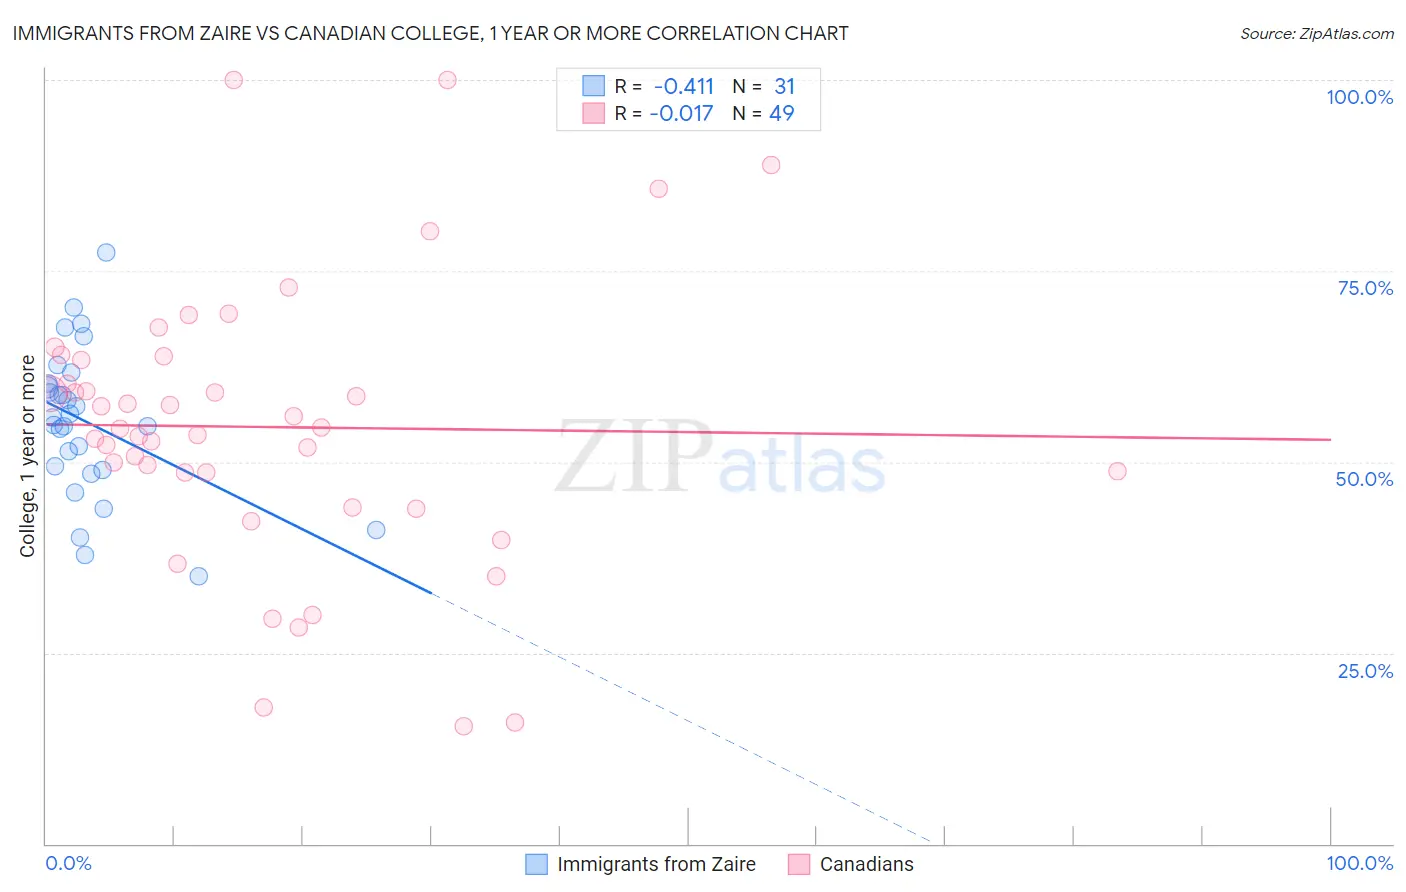 Immigrants from Zaire vs Canadian College, 1 year or more